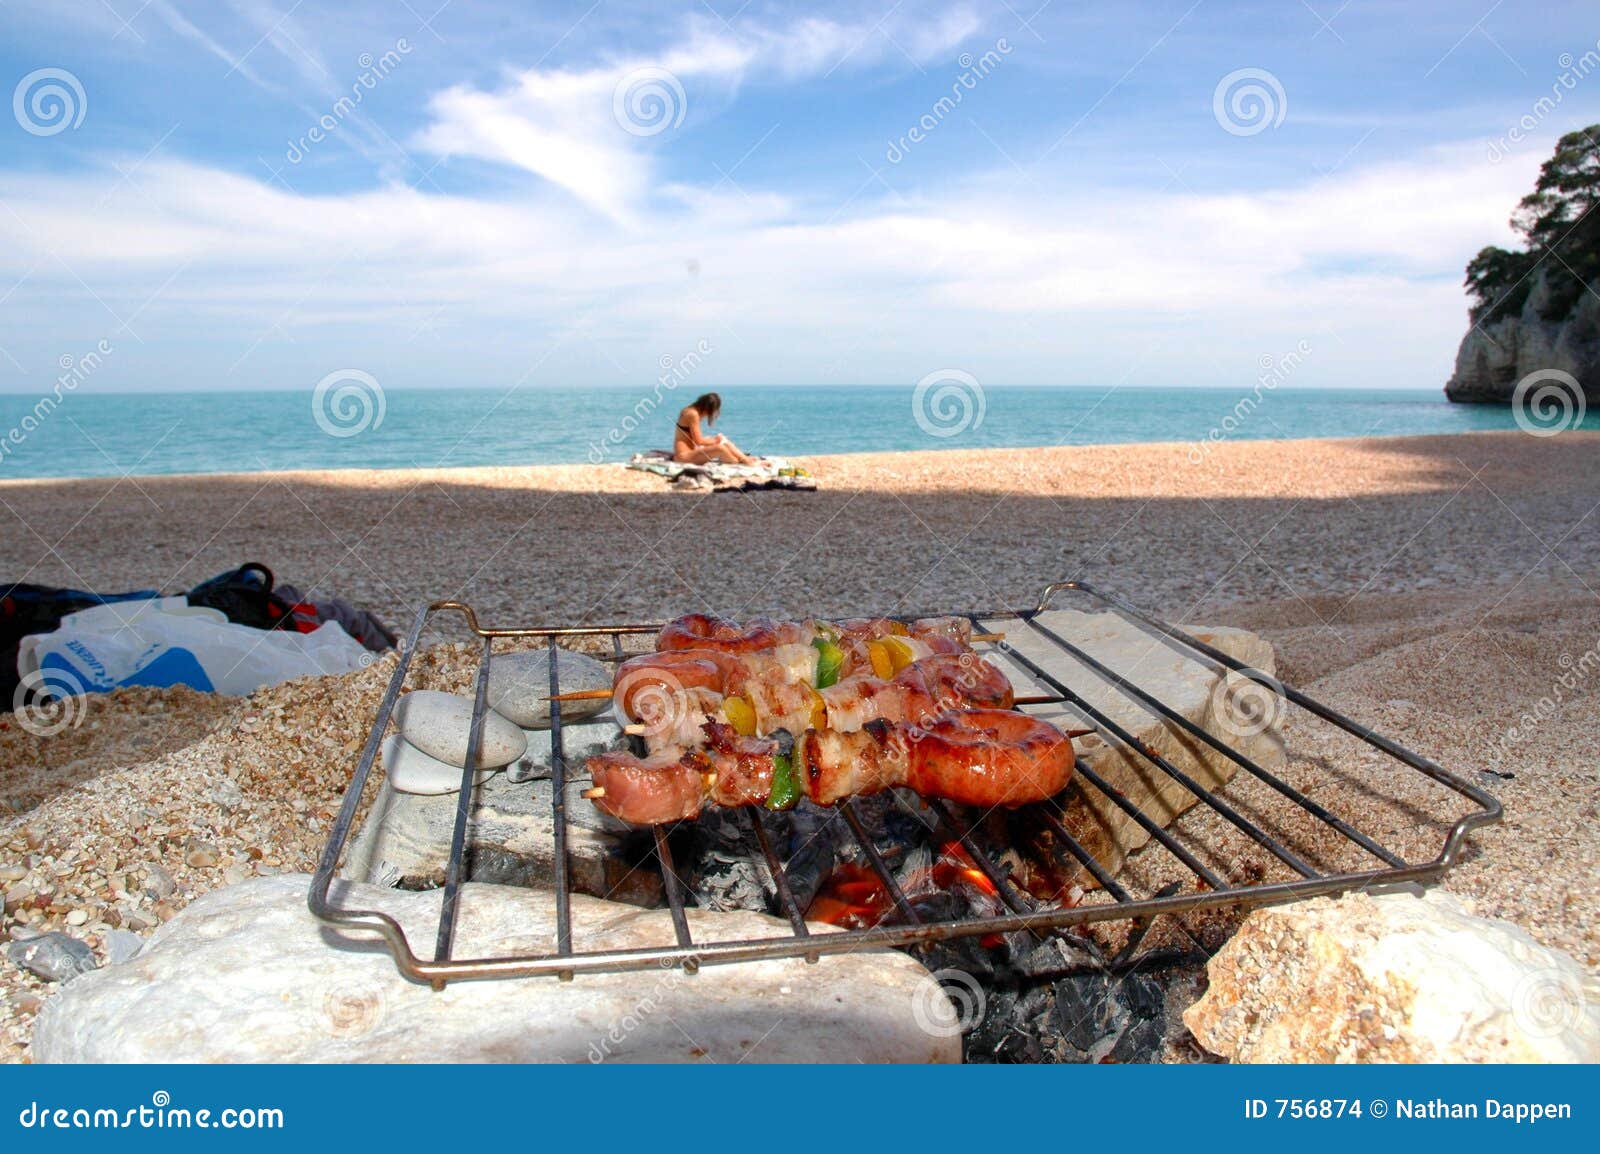 2,391 Beach Bbq Photos - Free & Royalty-Free Stock Photos from Dreamstime